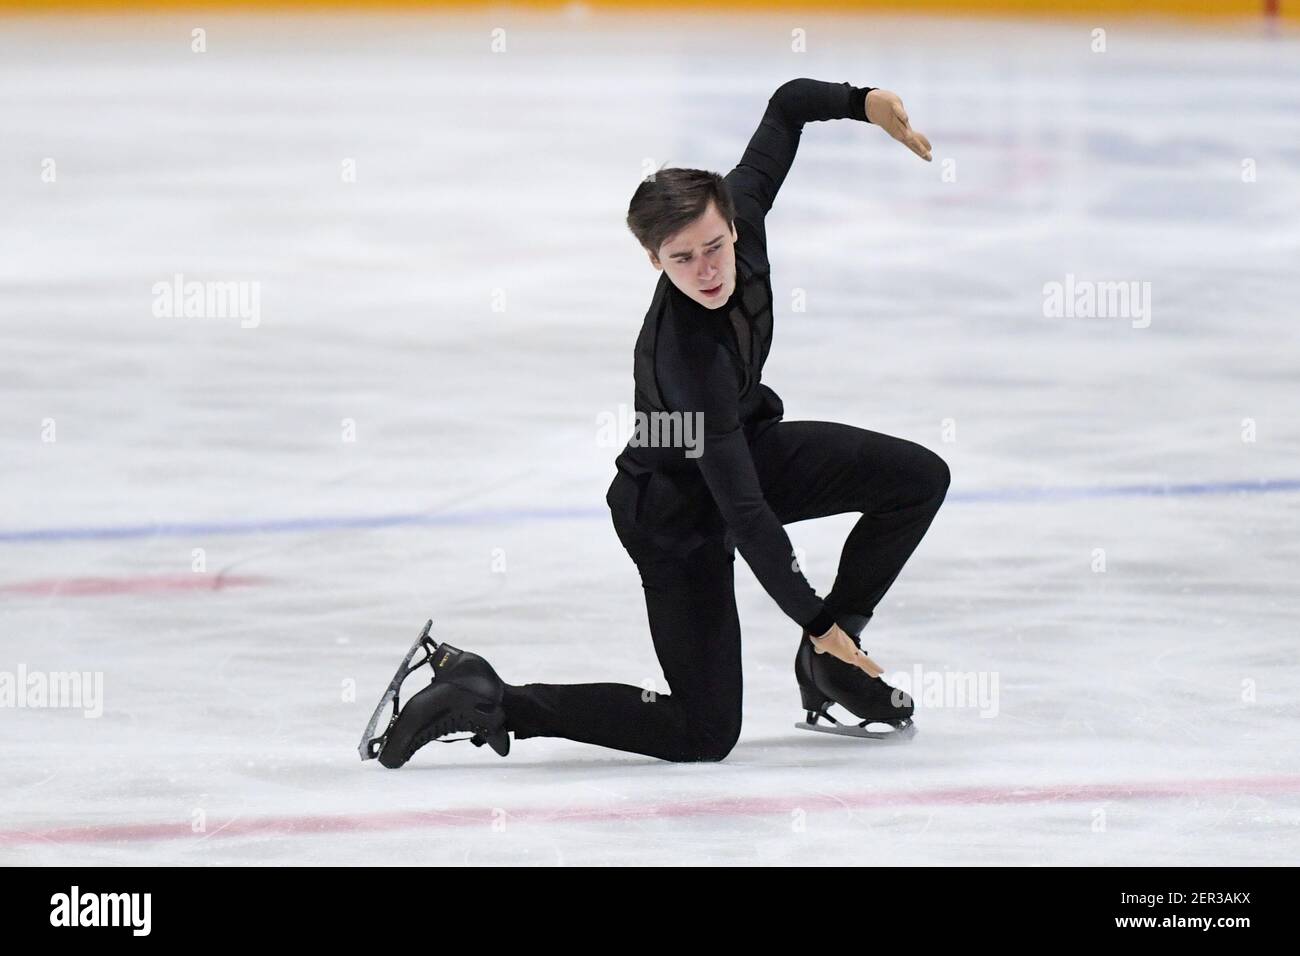 THE HAGUE, NETHERLANDS - FEBRUARY 28: Luc Maierhofer of Austria competes in the figure skating men's free skate program on Day 4 during the Challenge Stock Photo